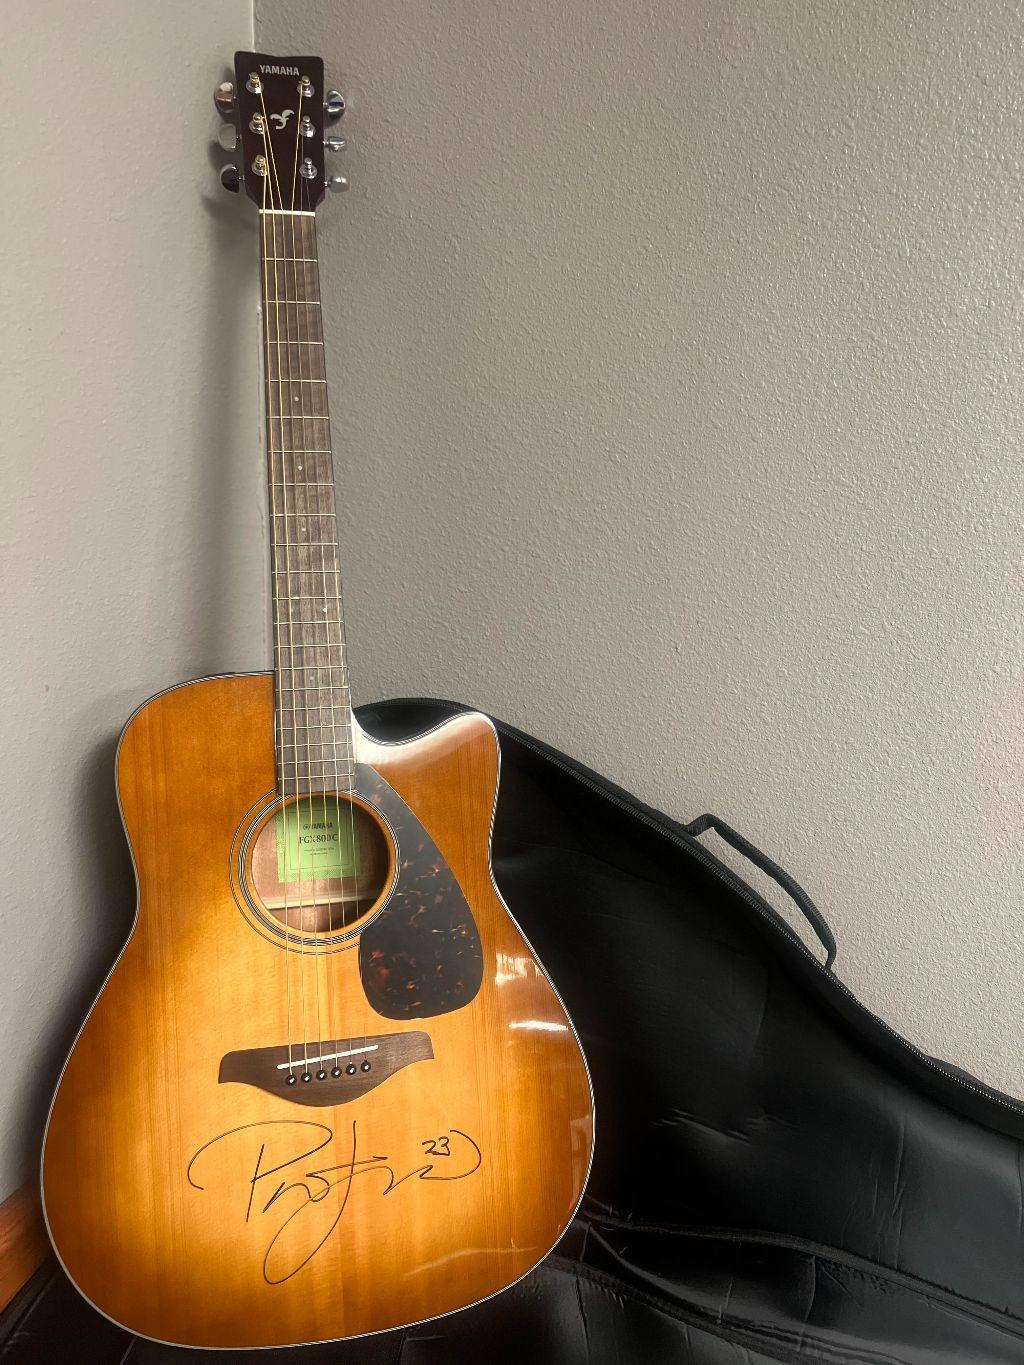 Yamaha Guitar Autographed by Pat Green